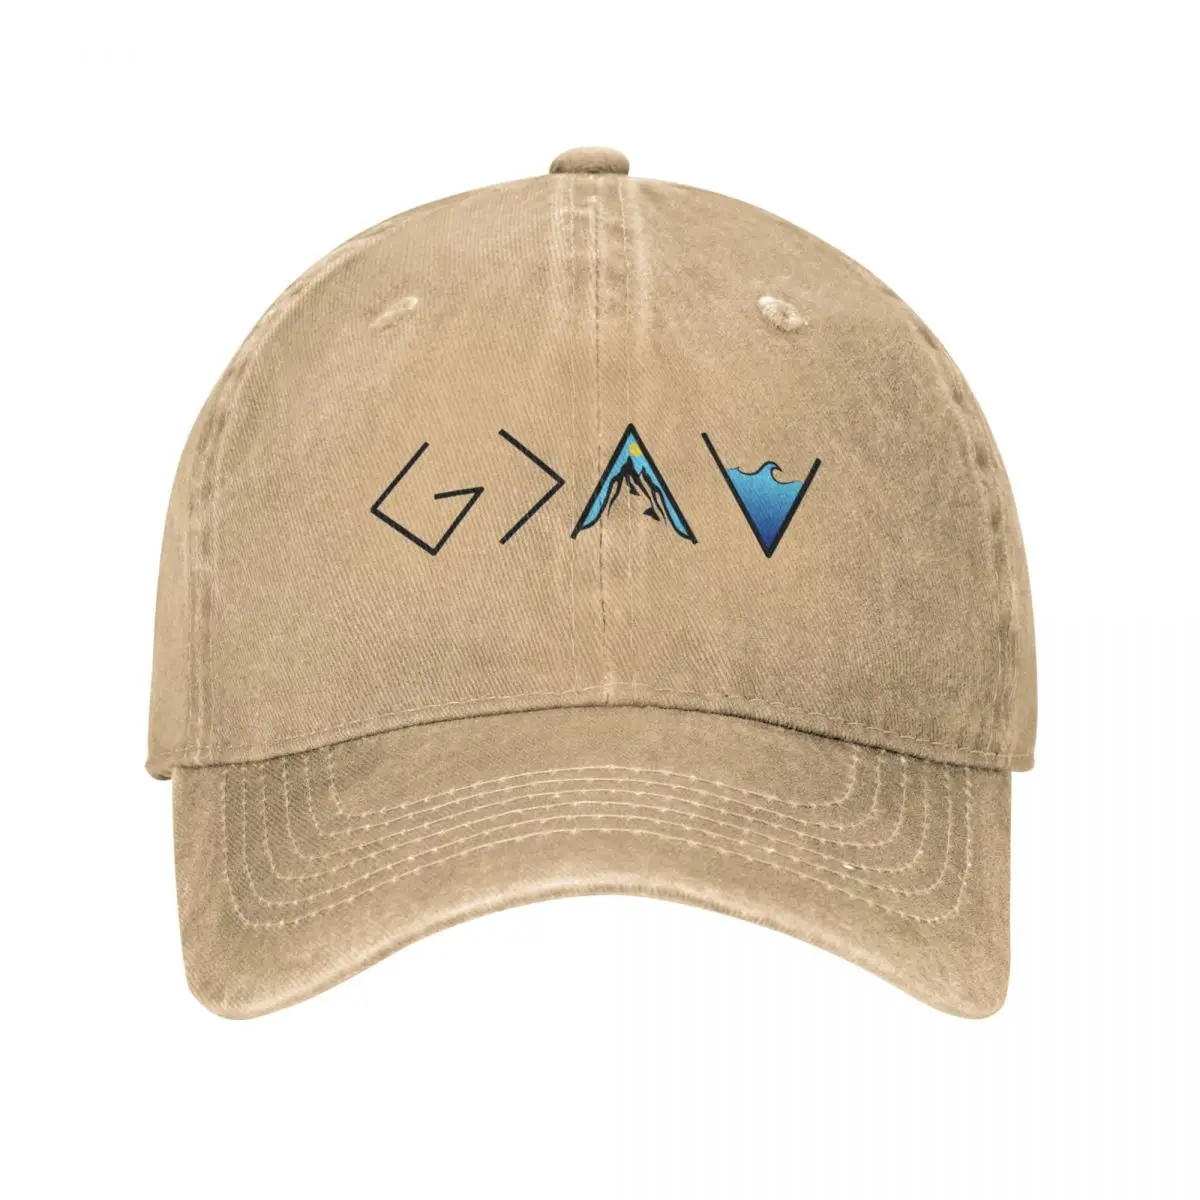 

Bible Verse God Is Greater Than The Highs And Lows Trucker Hat Distressed Denim Catholic Christian Quote Dad Hat Adjustable